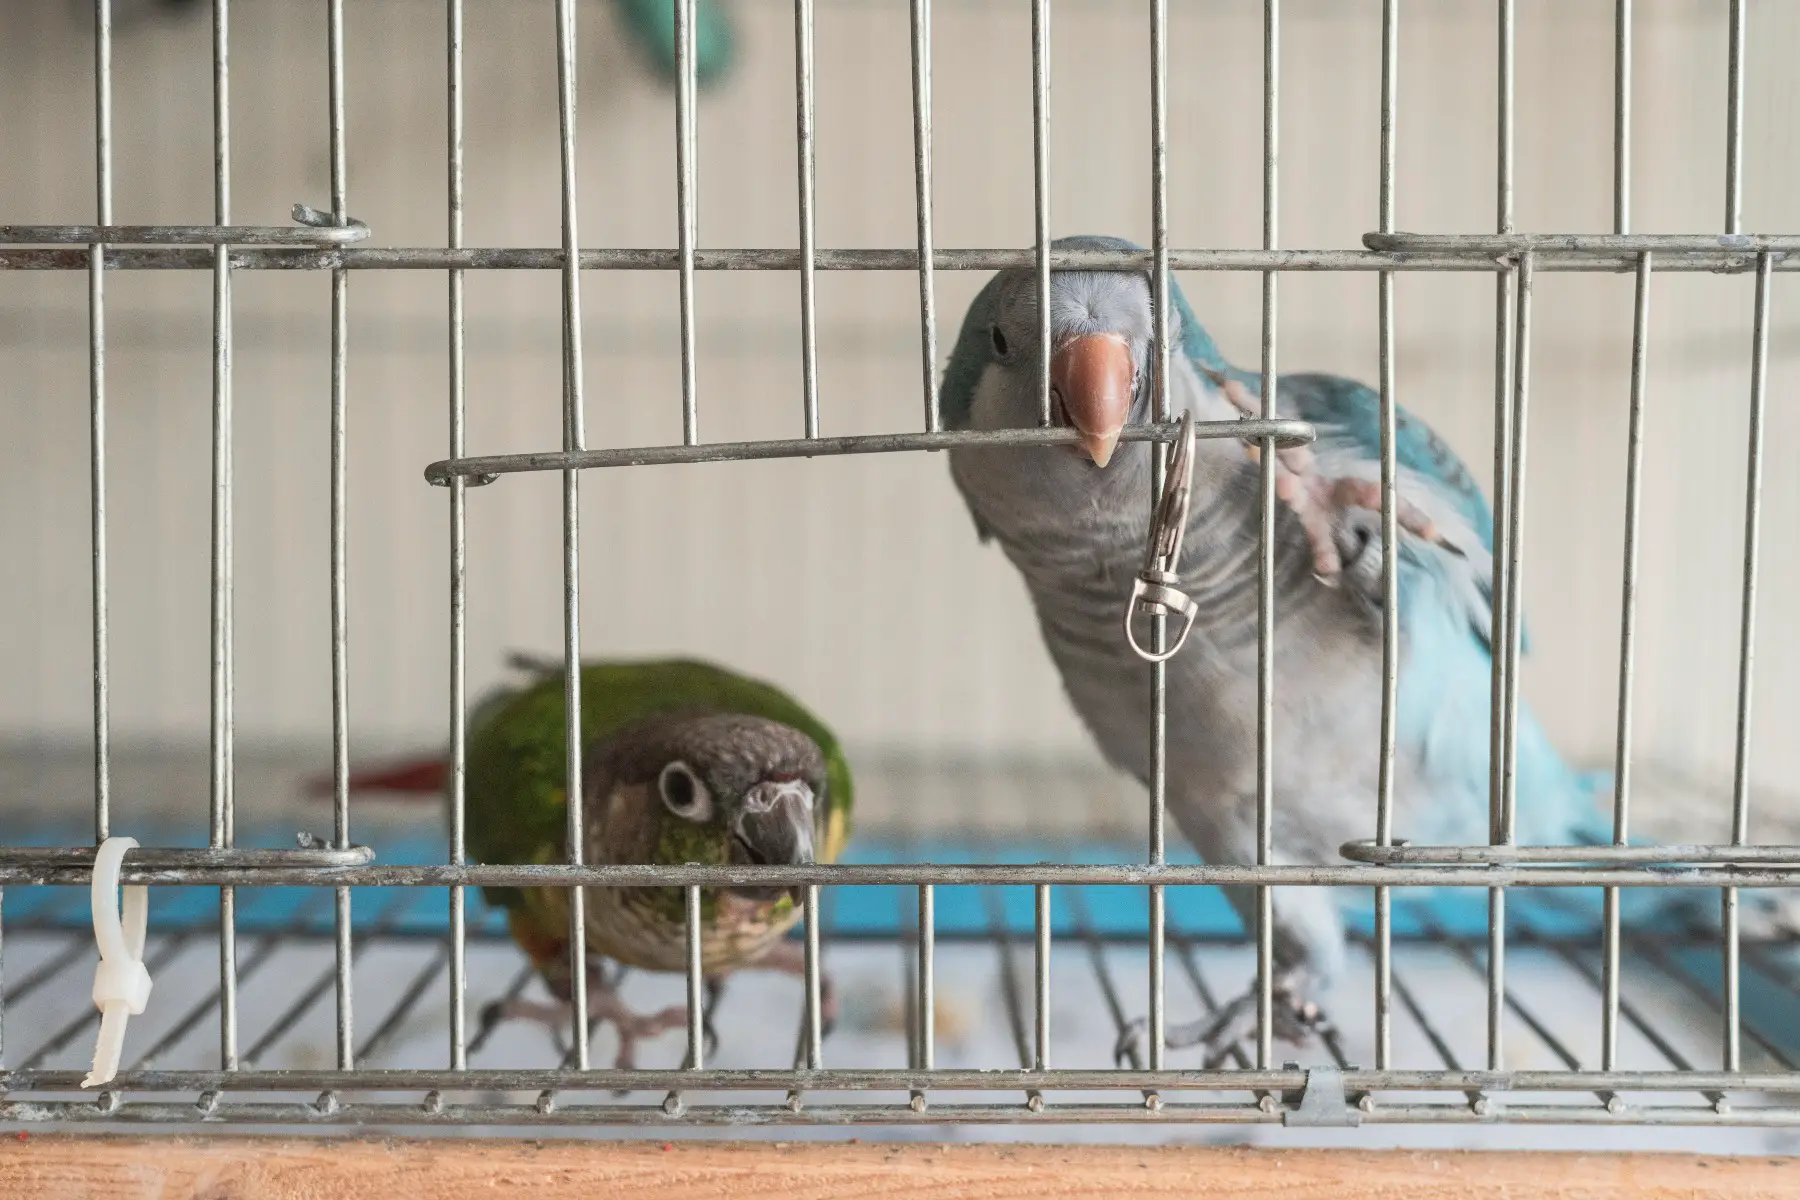 Two birds in a cage. One is opening the latch so the other can escape.